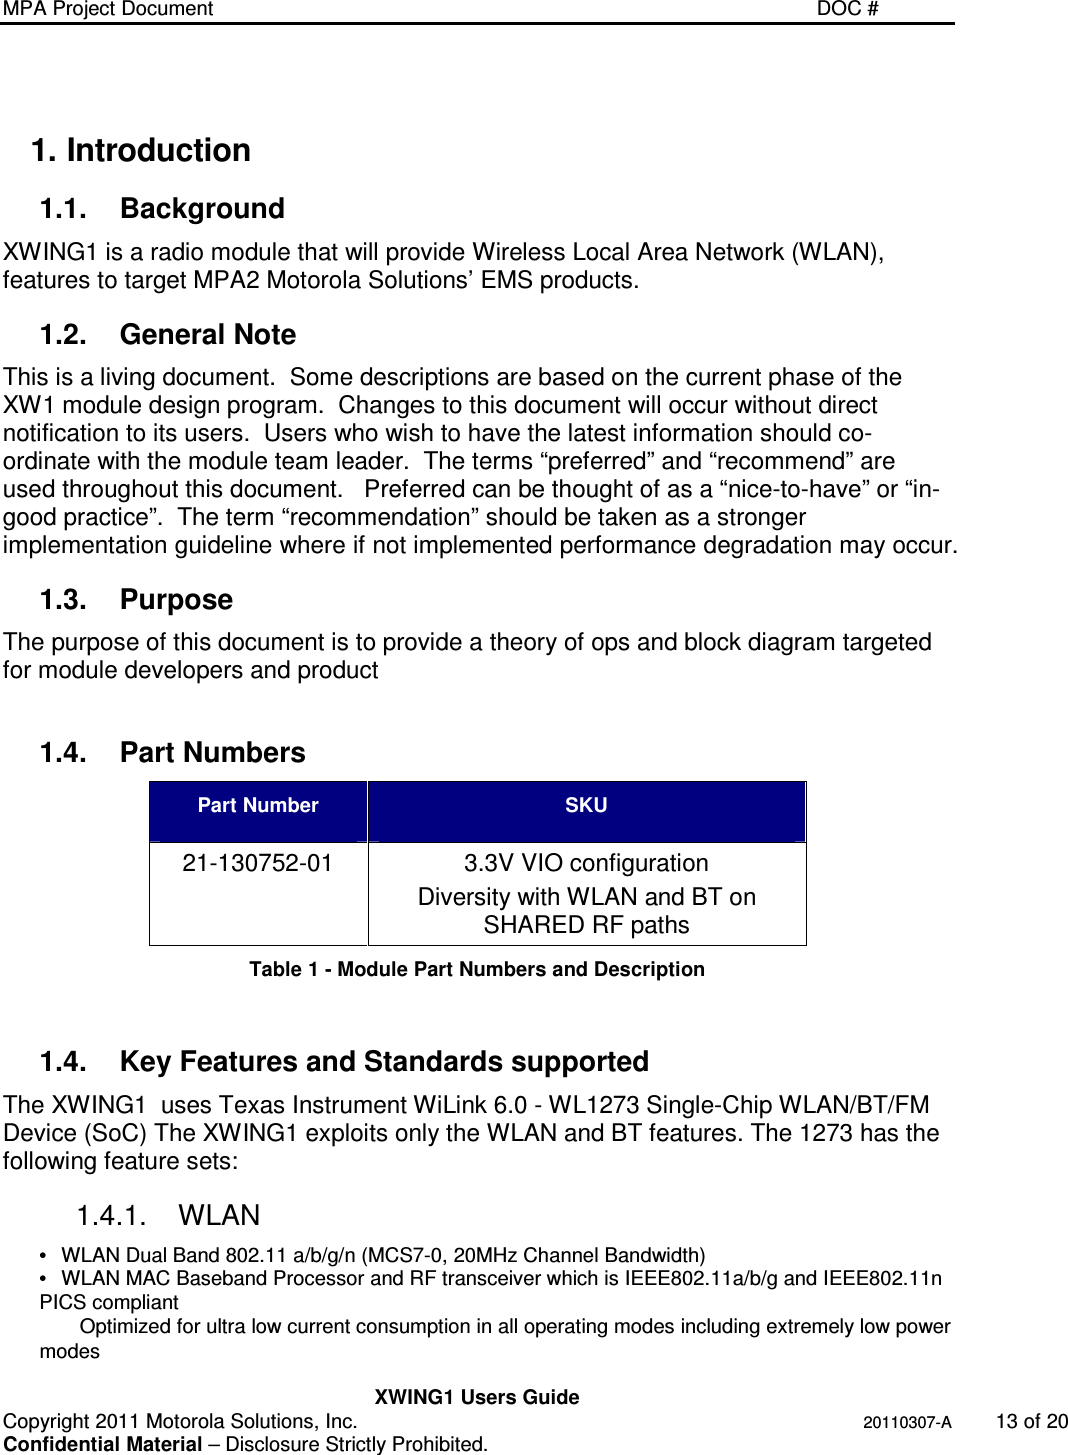 MPA Project Document   DOC #    XWING1 Users Guide Copyright 2011 Motorola Solutions, Inc.   20110307-A  13 of 20 Confidential Material – Disclosure Strictly Prohibited. 1. Introduction 1.1.  Background XWING1 is a radio module that will provide Wireless Local Area Network (WLAN), features to target MPA2 Motorola Solutions’ EMS products. 1.2.  General Note This is a living document.  Some descriptions are based on the current phase of the XW1 module design program.  Changes to this document will occur without direct notification to its users.  Users who wish to have the latest information should co-ordinate with the module team leader.  The terms “preferred” and “recommend” are used throughout this document.   Preferred can be thought of as a “nice-to-have” or “in-good practice”.  The term “recommendation” should be taken as a stronger implementation guideline where if not implemented performance degradation may occur. 1.3.  Purpose The purpose of this document is to provide a theory of ops and block diagram targeted for module developers and product  1.4.  Part Numbers Part Number  SKU 21-130752-01  3.3V VIO configuration  Diversity with WLAN and BT on SHARED RF paths Table 1 - Module Part Numbers and Description  1.4.  Key Features and Standards supported The XWING1  uses Texas Instrument WiLink 6.0 - WL1273 Single-Chip WLAN/BT/FM Device (SoC) The XWING1 exploits only the WLAN and BT features. The 1273 has the following feature sets: 1.4.1.  WLAN  •  WLAN Dual Band 802.11 a/b/g/n (MCS7-0, 20MHz Channel Bandwidth) •  WLAN MAC Baseband Processor and RF transceiver which is IEEE802.11a/b/g and IEEE802.11n PICS compliant Optimized for ultra low current consumption in all operating modes including extremely low power modes 